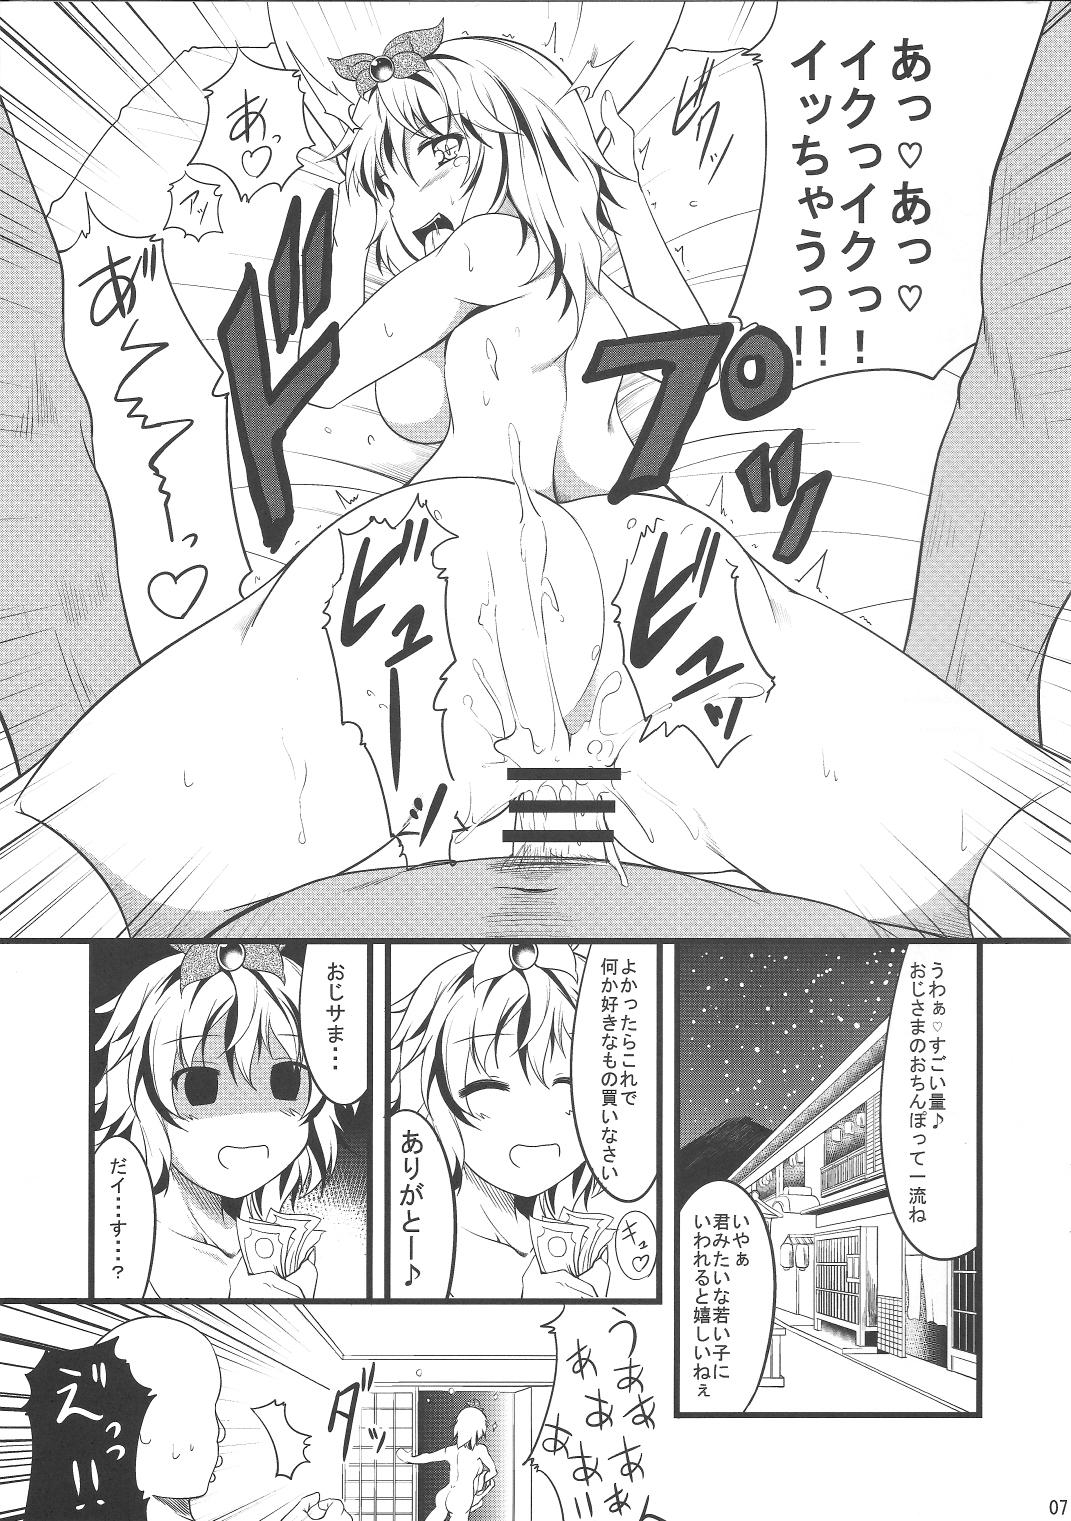 Couples Fucking Jouyoku no Tora - Tiger of passion - Touhou project Free Fuck - Page 6